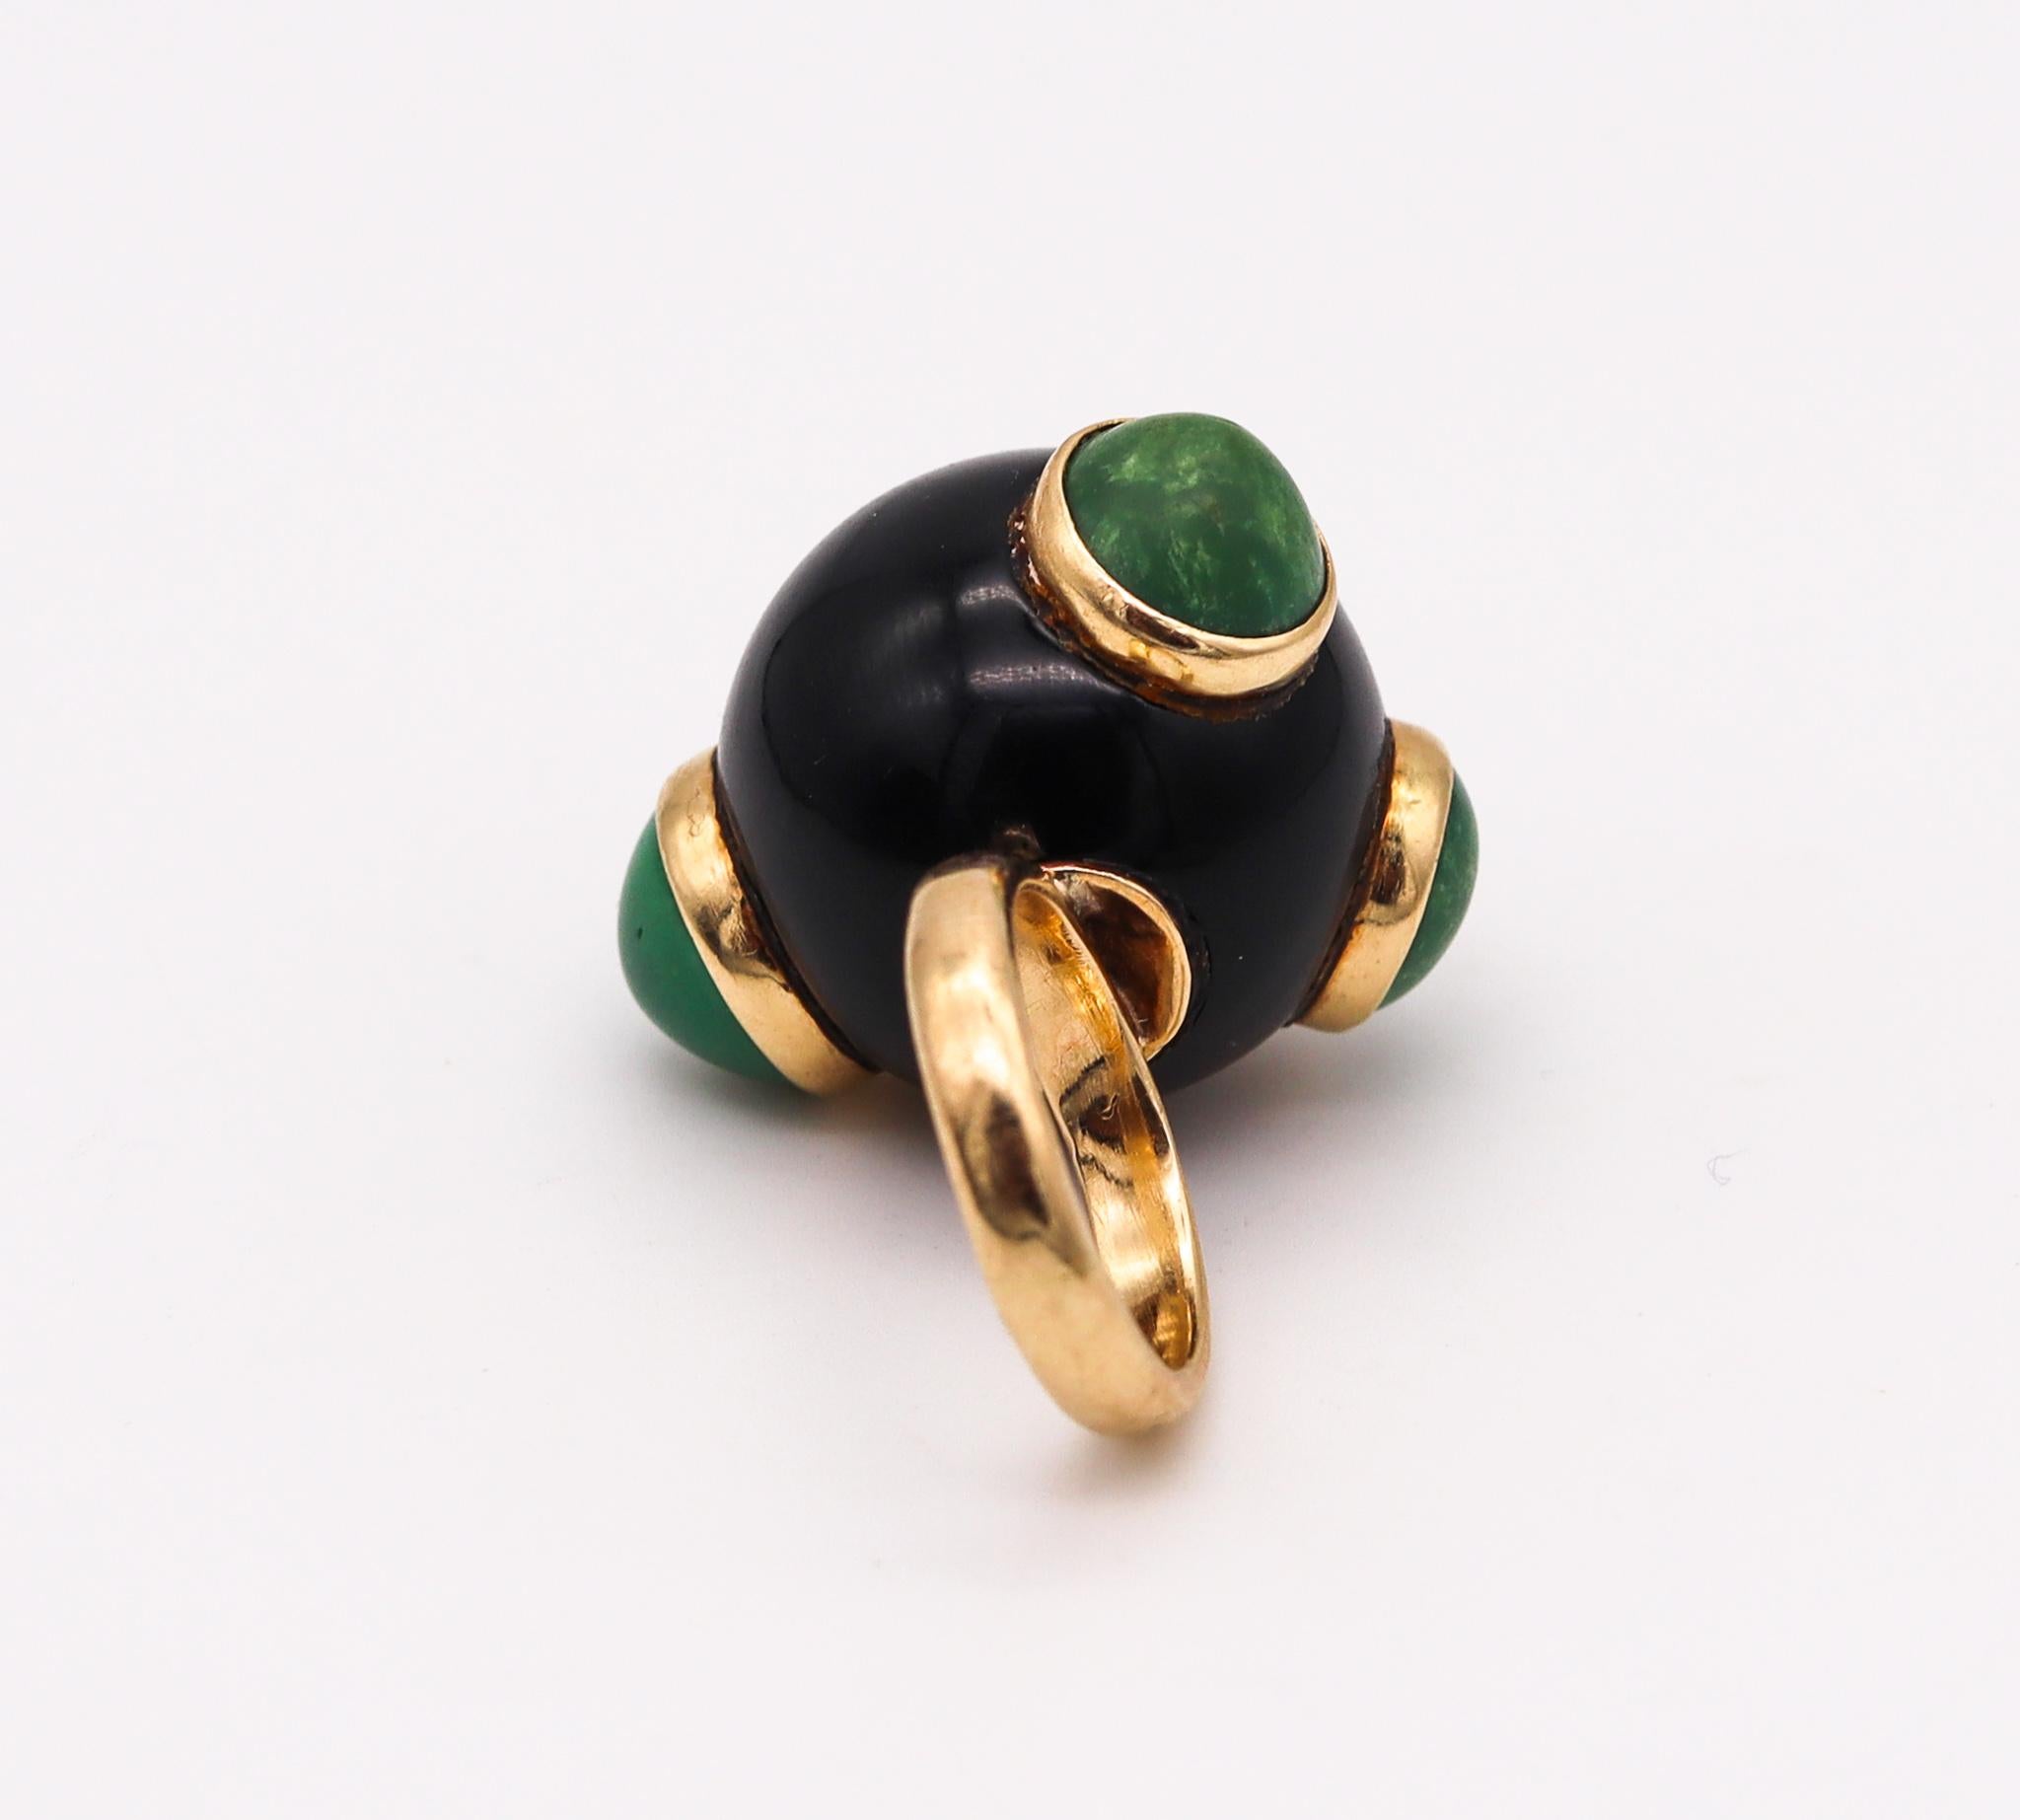 Cabochon Italian Spatialism 1970 Retro Sculptural Ring 14Kt Gold with Onyx and Turquoise For Sale